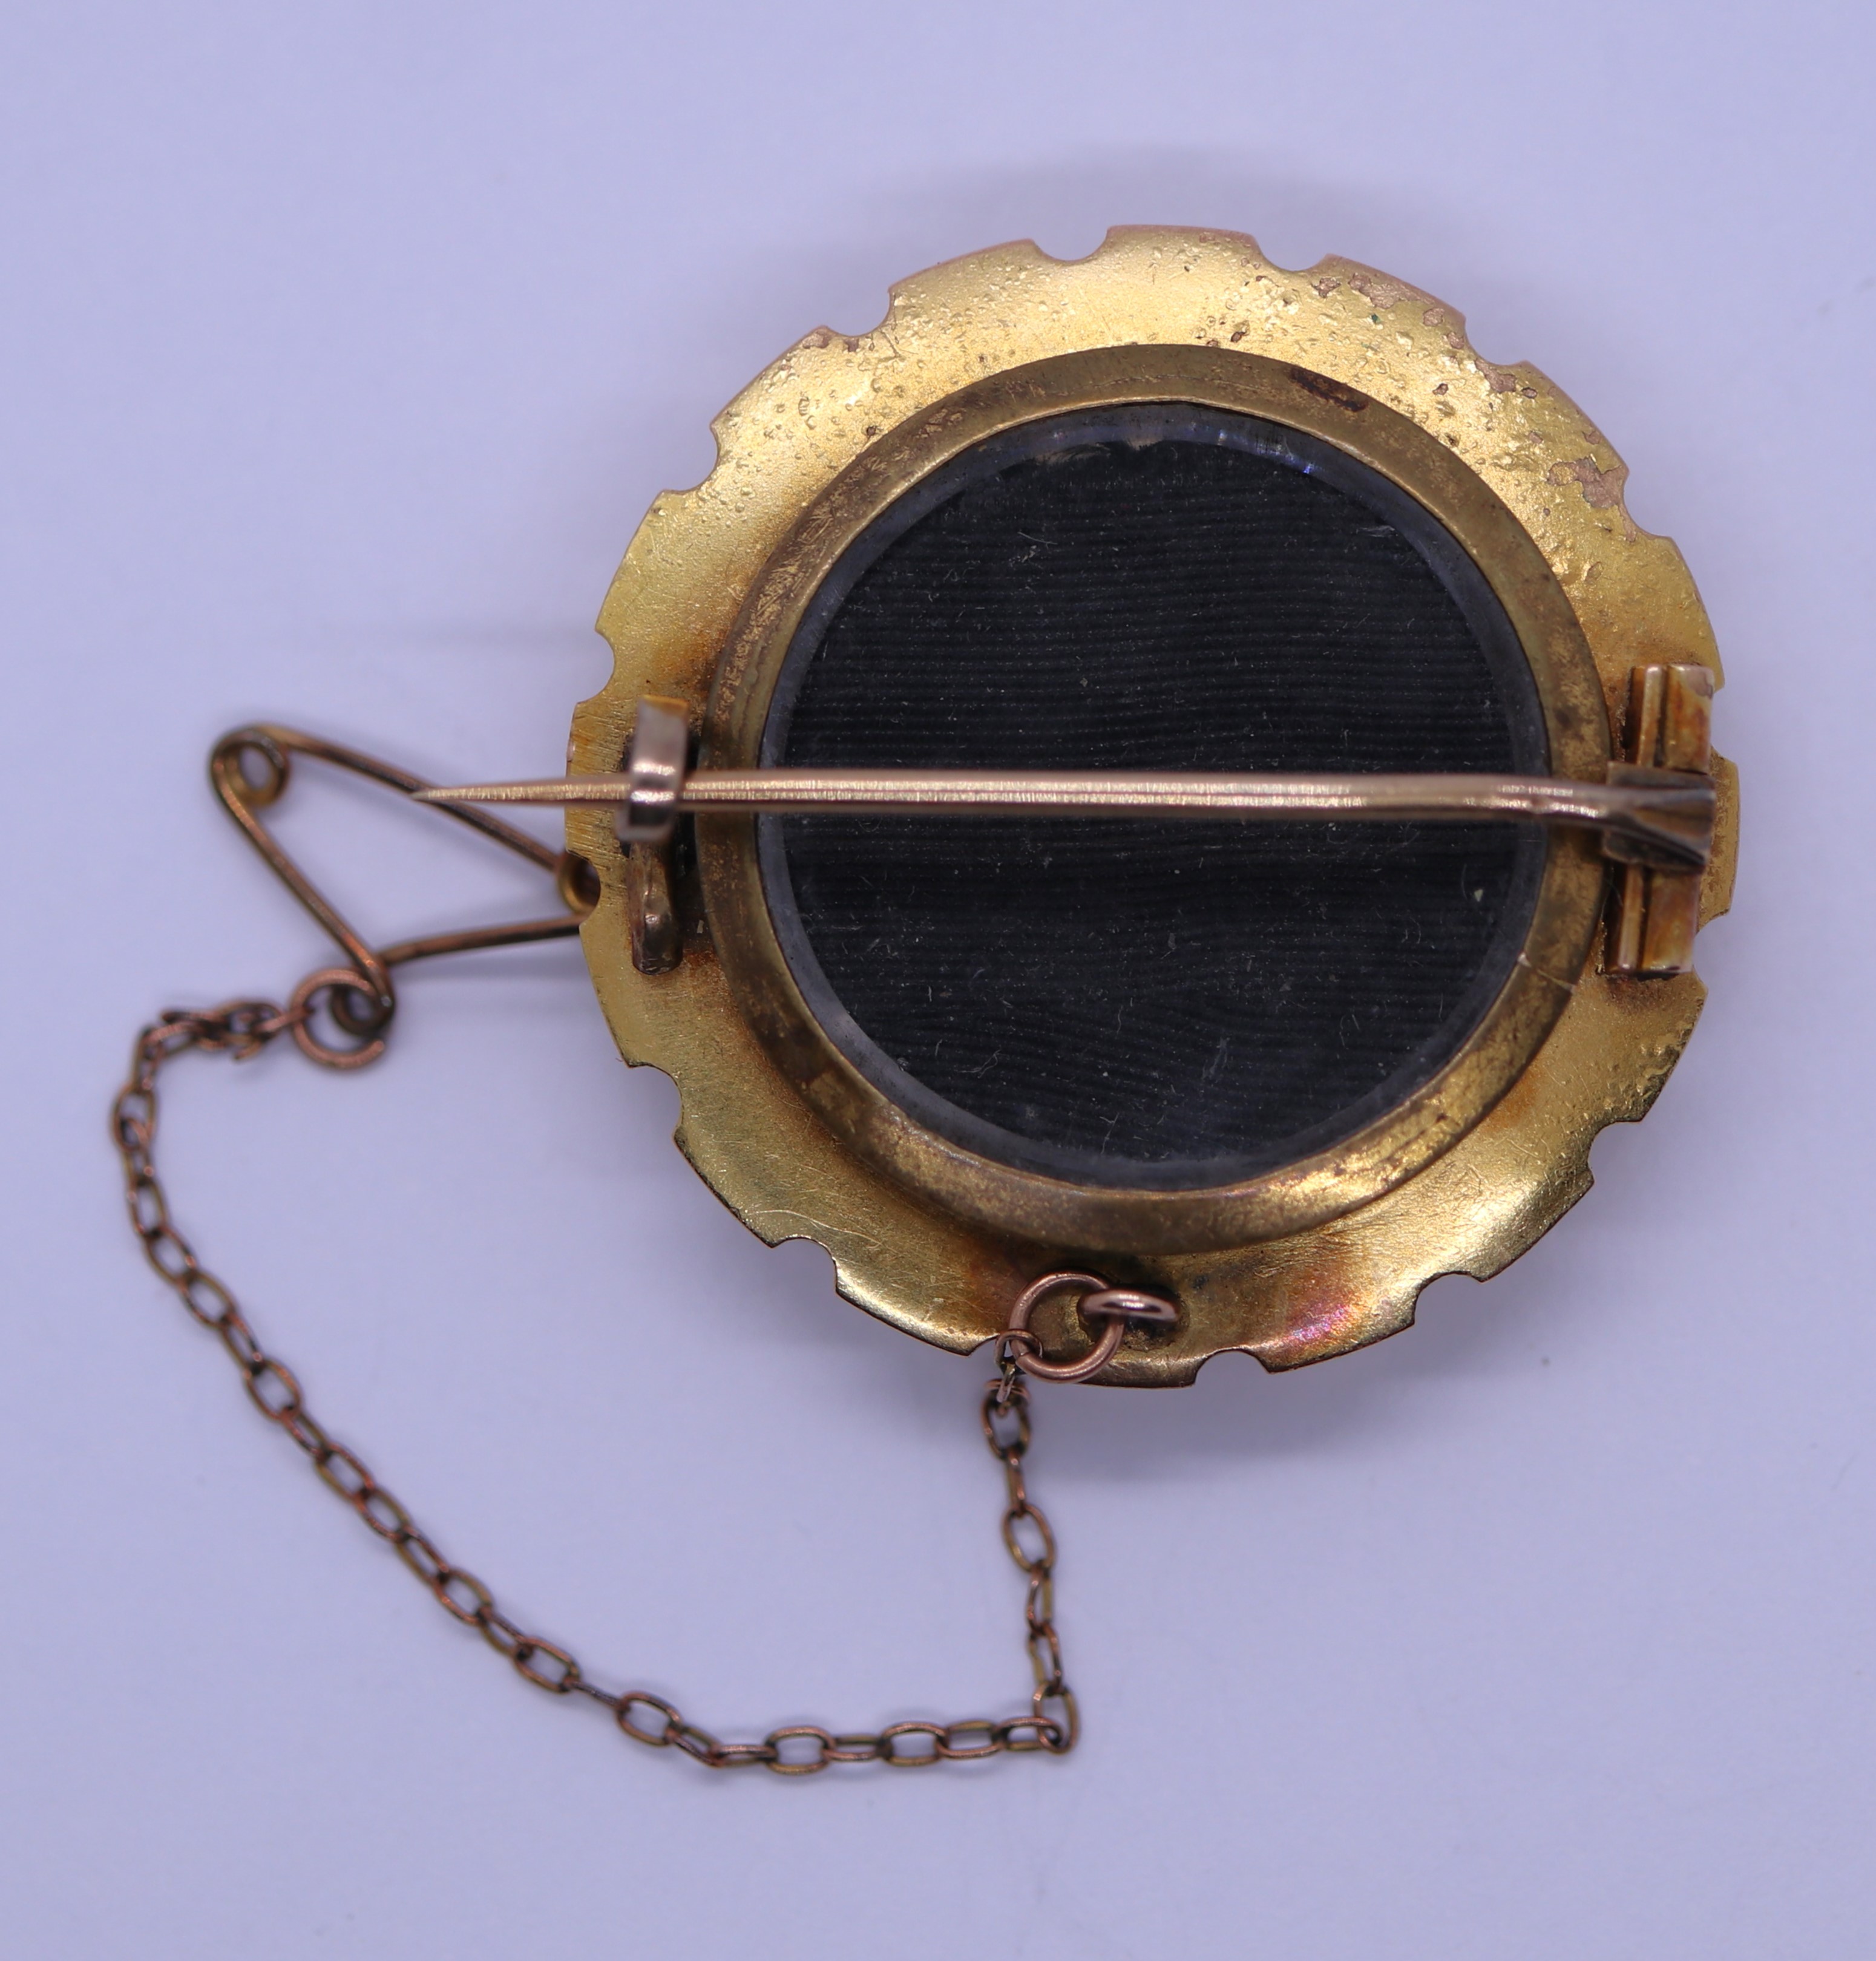 Gold mourning brooch set with a 22ct $2.5 coin dated 1873 - Gross weight 12.2g - Image 4 of 4